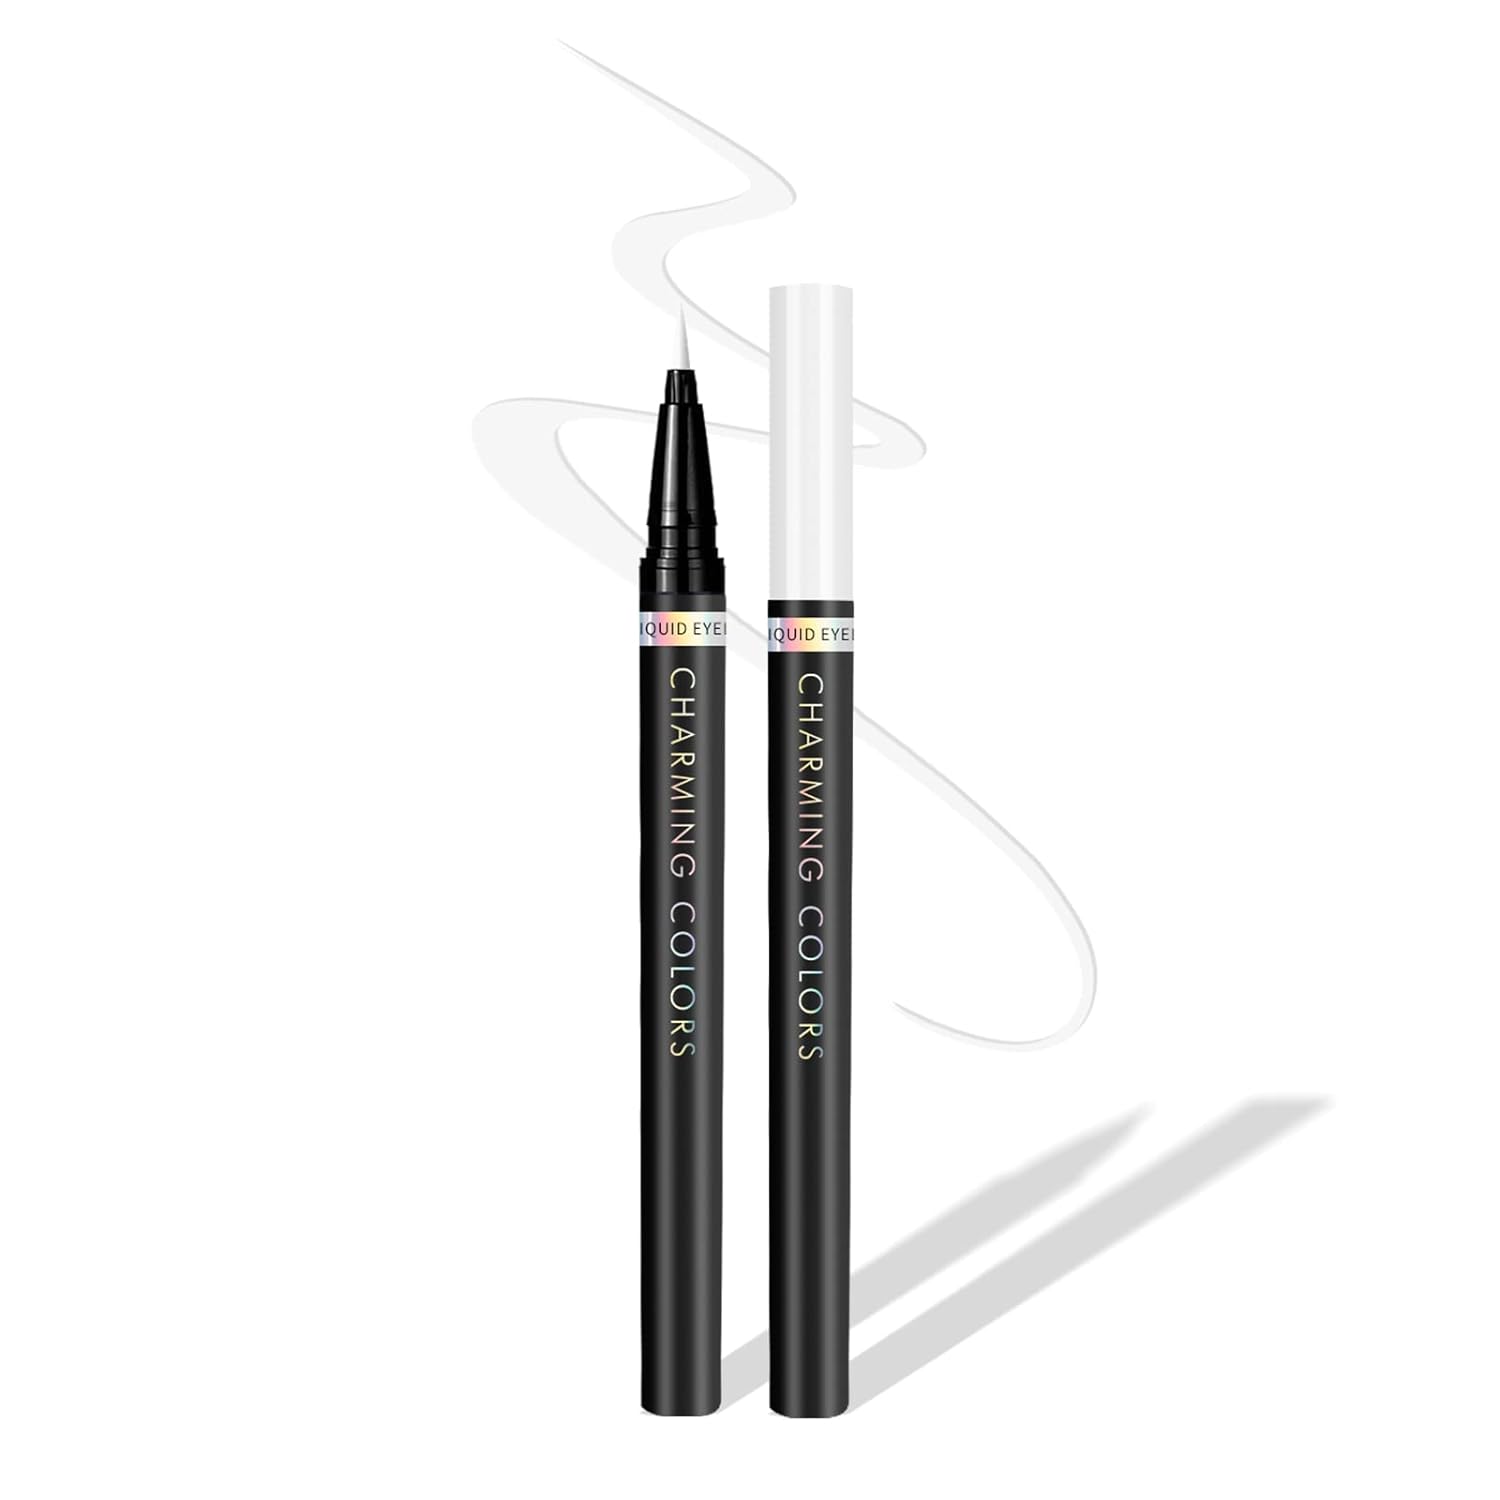 Music ower Eyeliner Pen,Colored Matte Liquid Eyeliner Waterproof Smudge Resistant with Precise Tip (White)